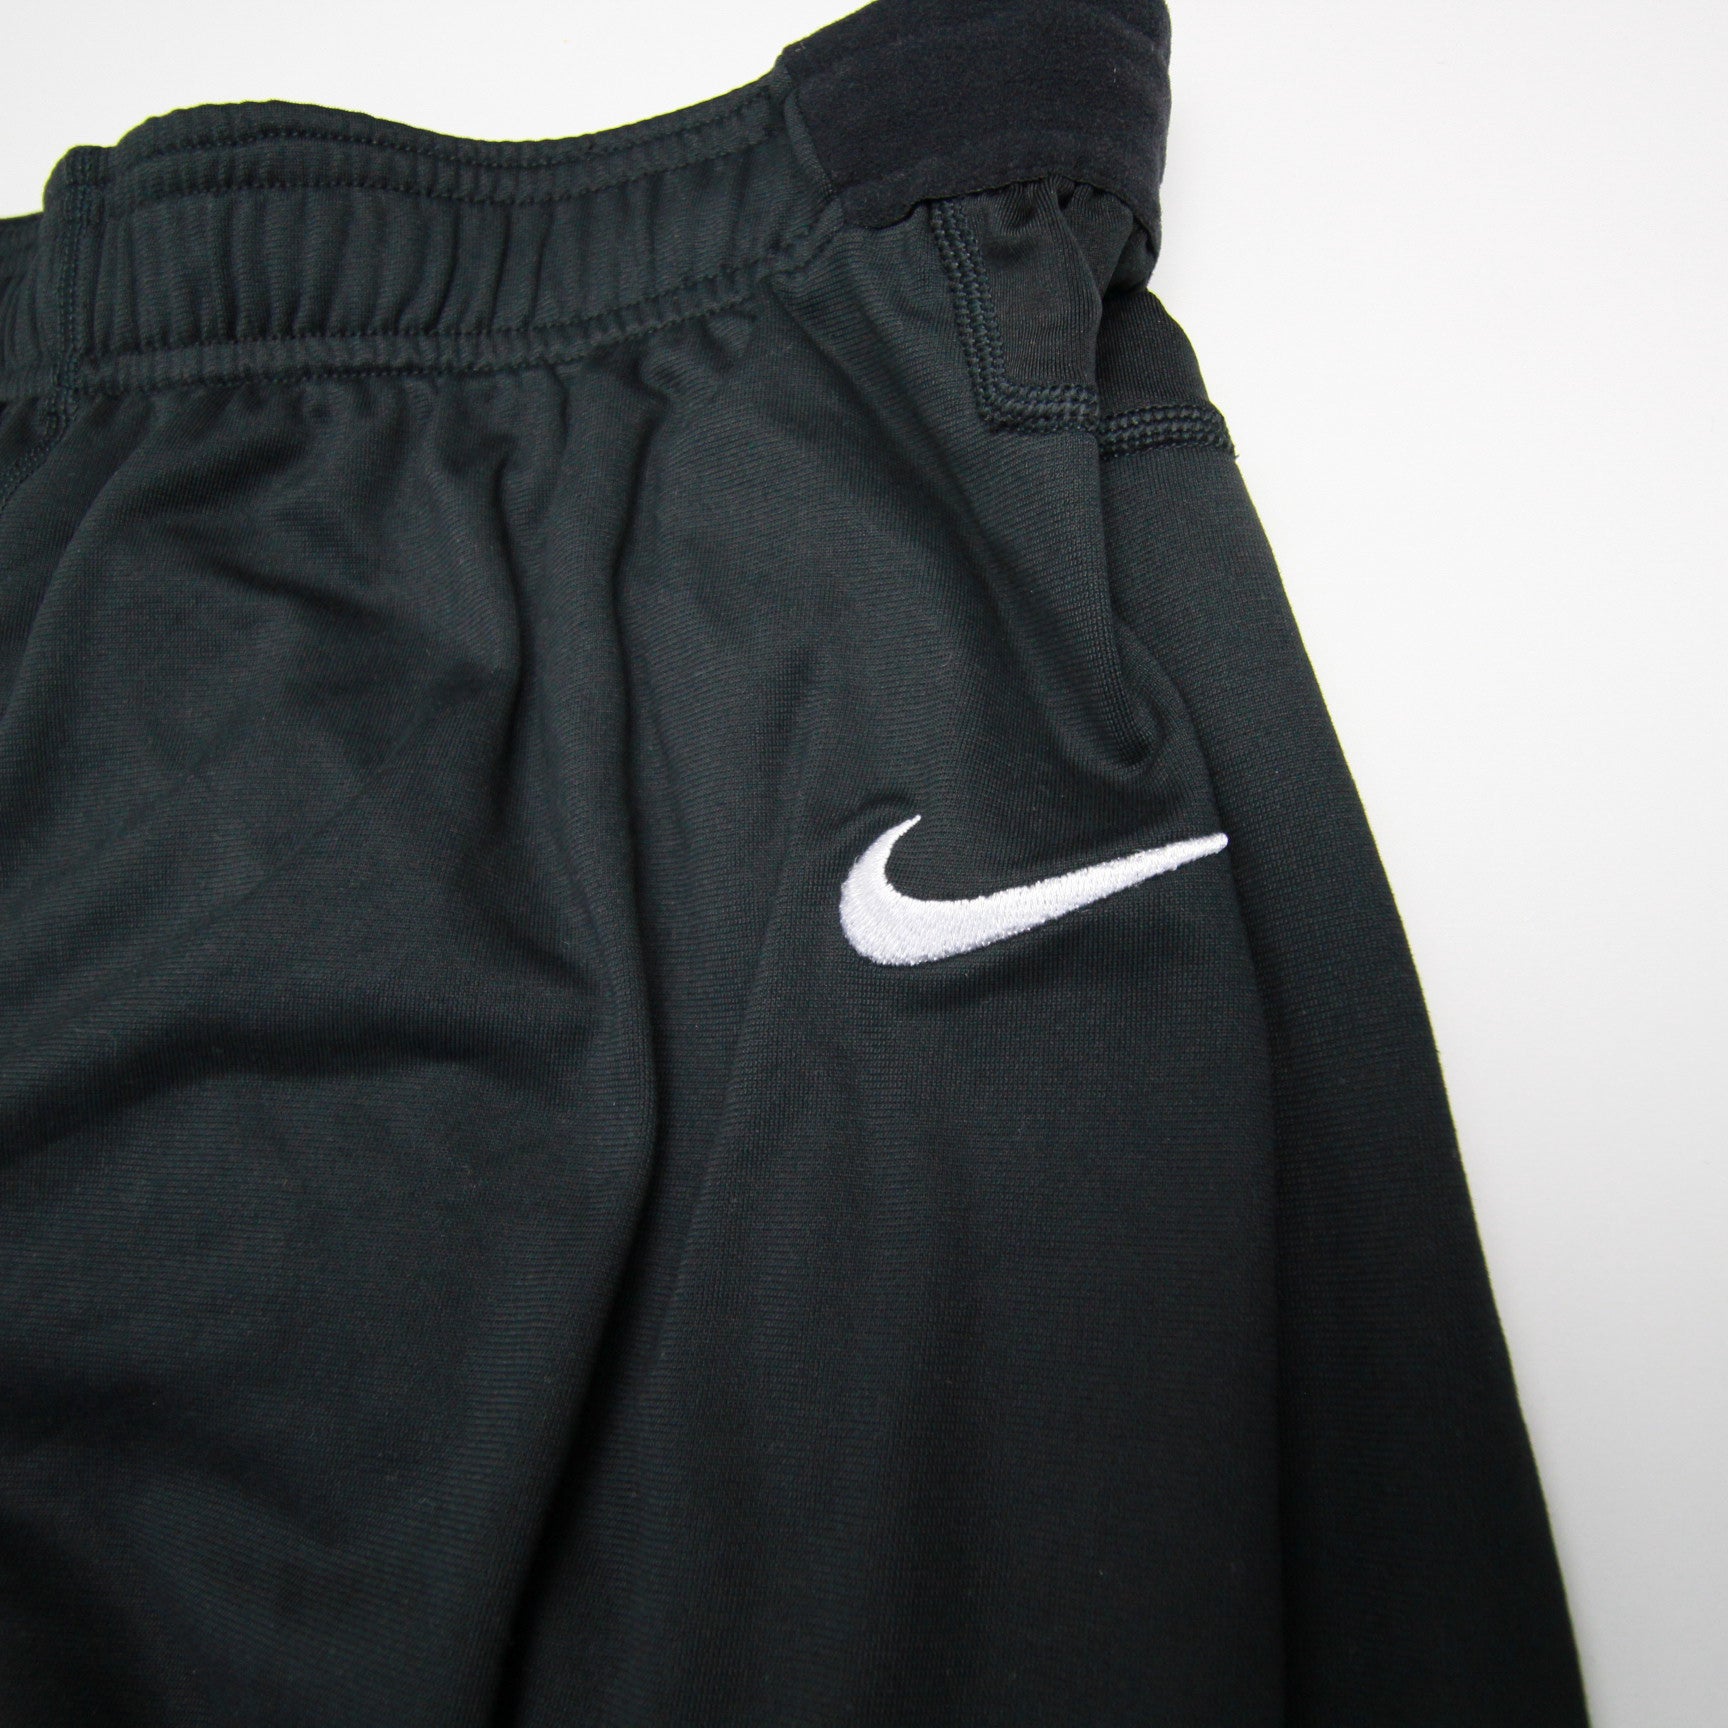 Nike Dri-Fit Athletic Pants Women's Dark Gray/Black New with Tags